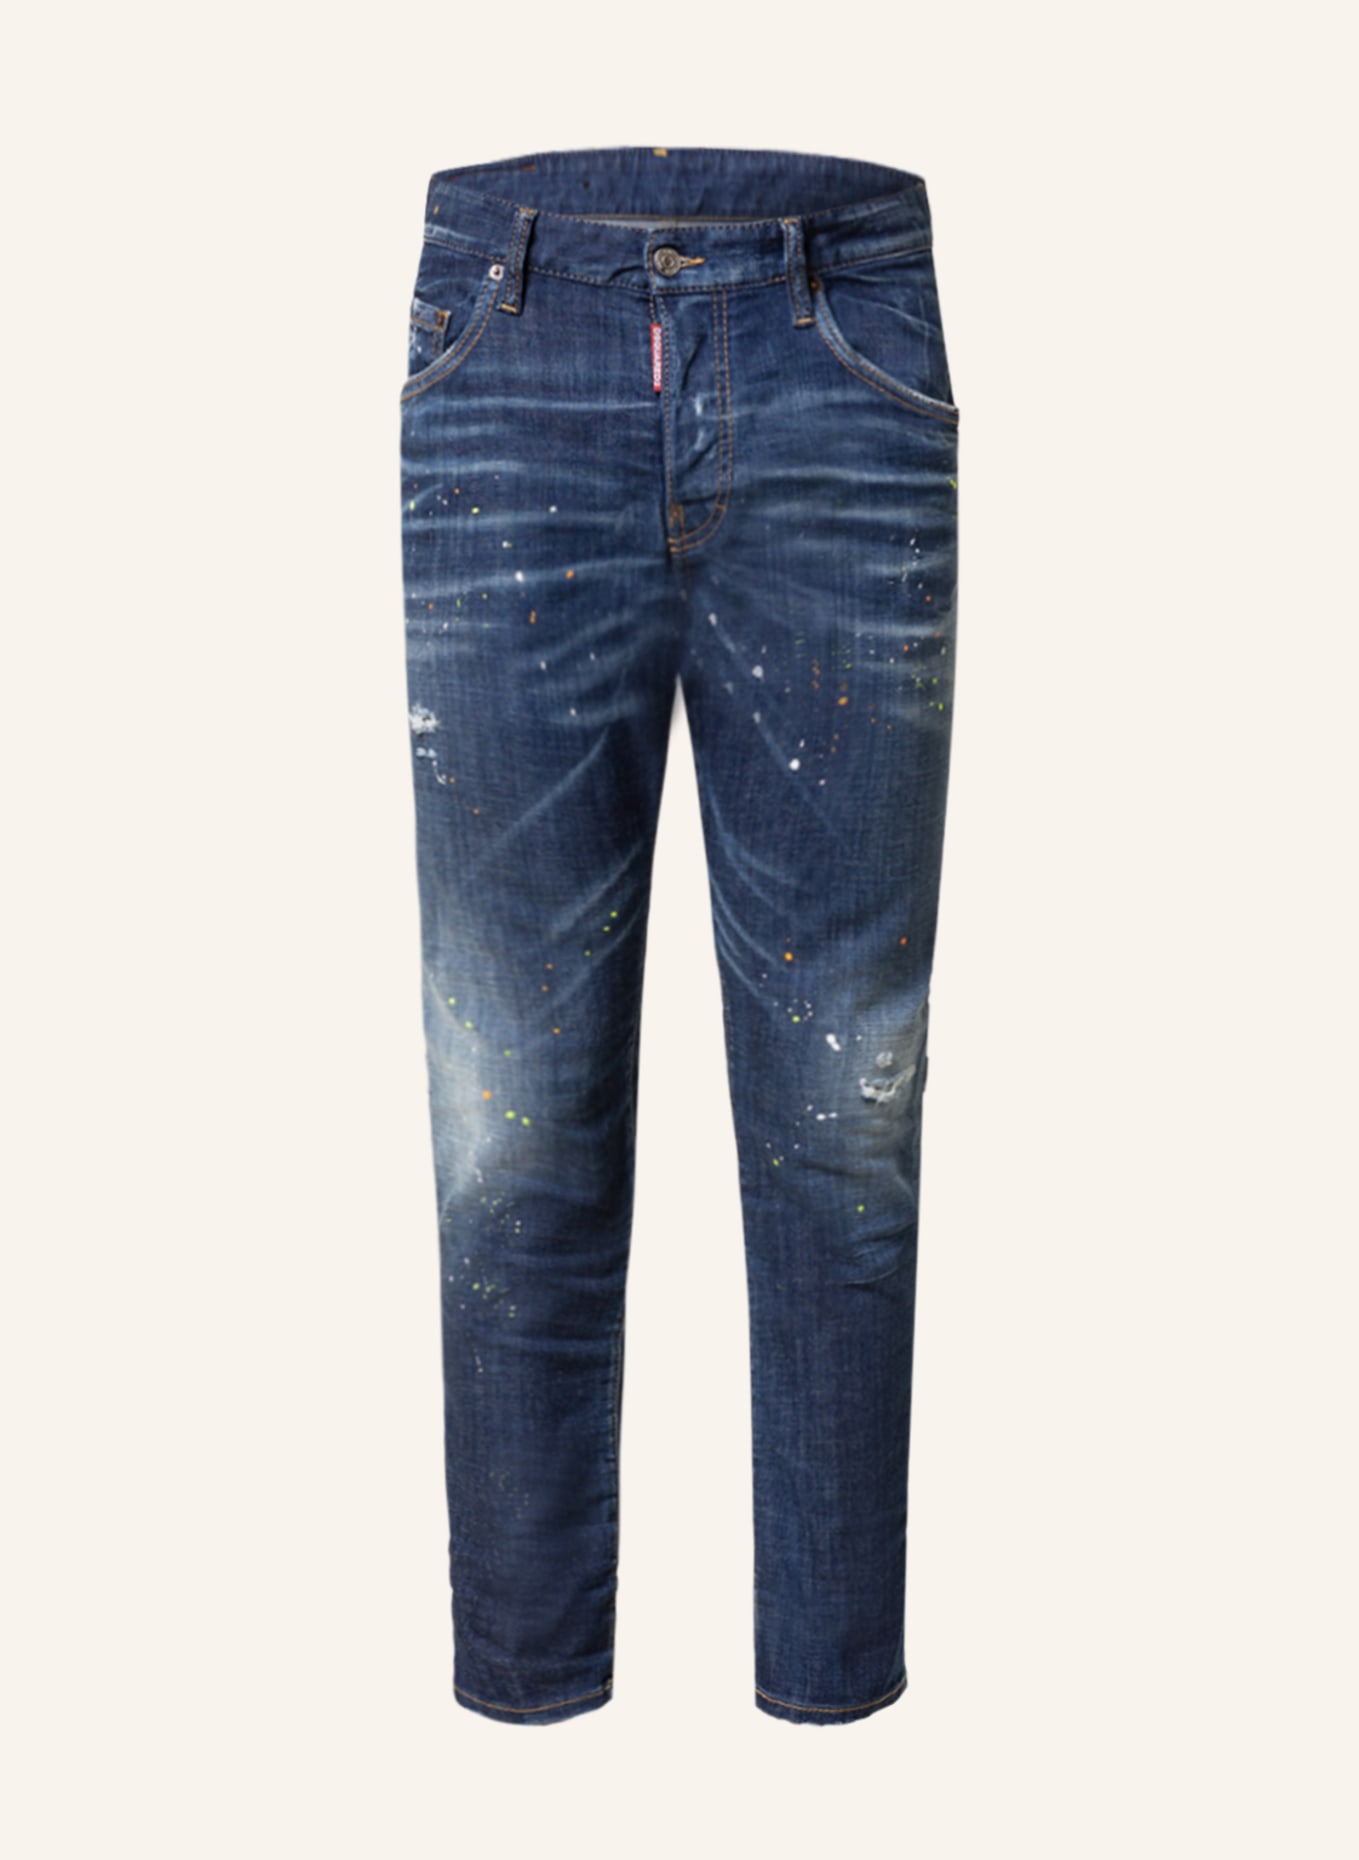 DSQUARED2 Jeans extra slim fit in 470 navy